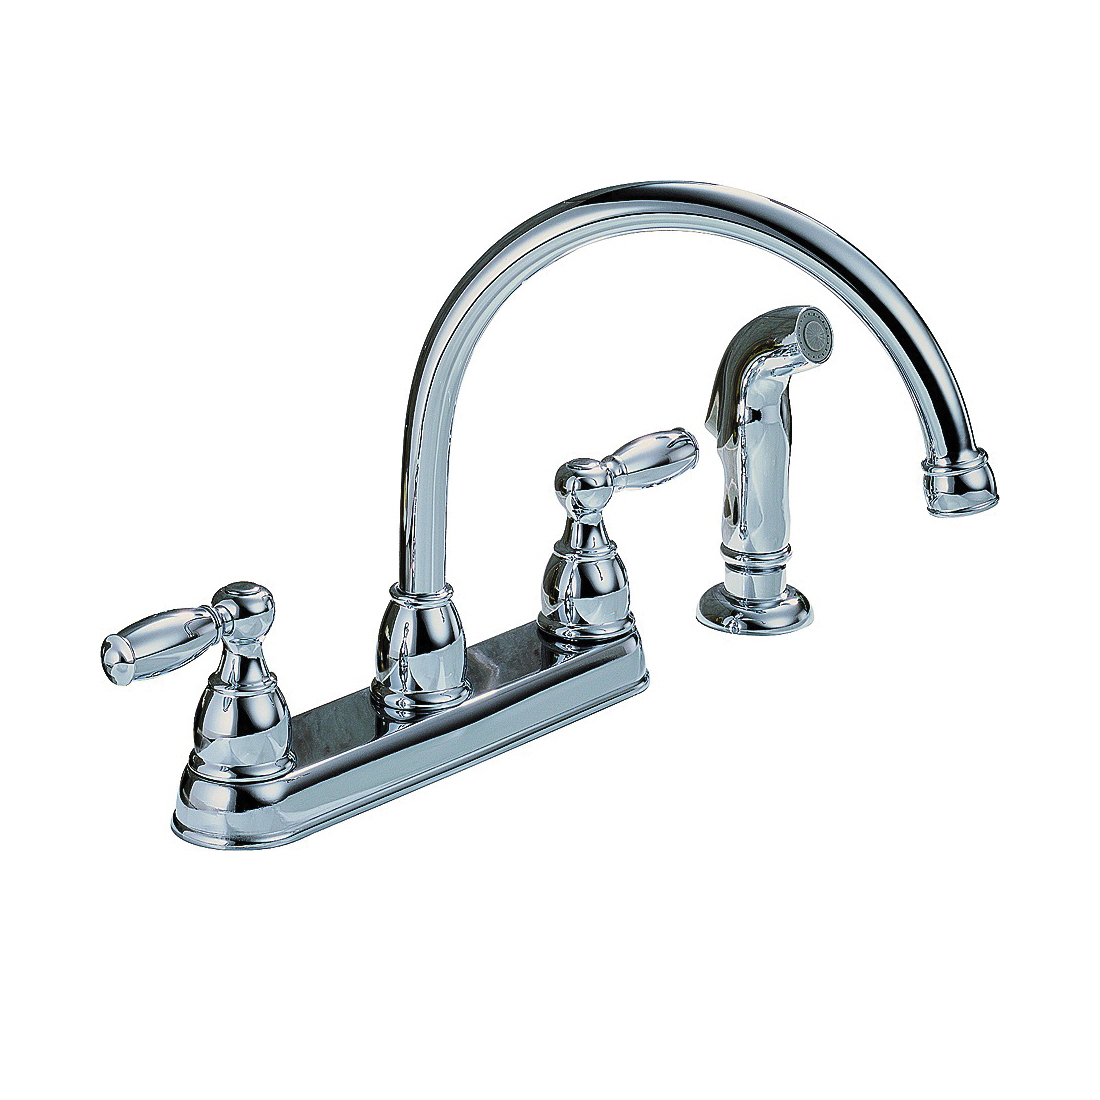 Peerless Claymore Series P299575LF Kitchen Faucet, 1.8 gpm, 2-Faucet Handle, Chrome Plated, Deck, Lever Handle